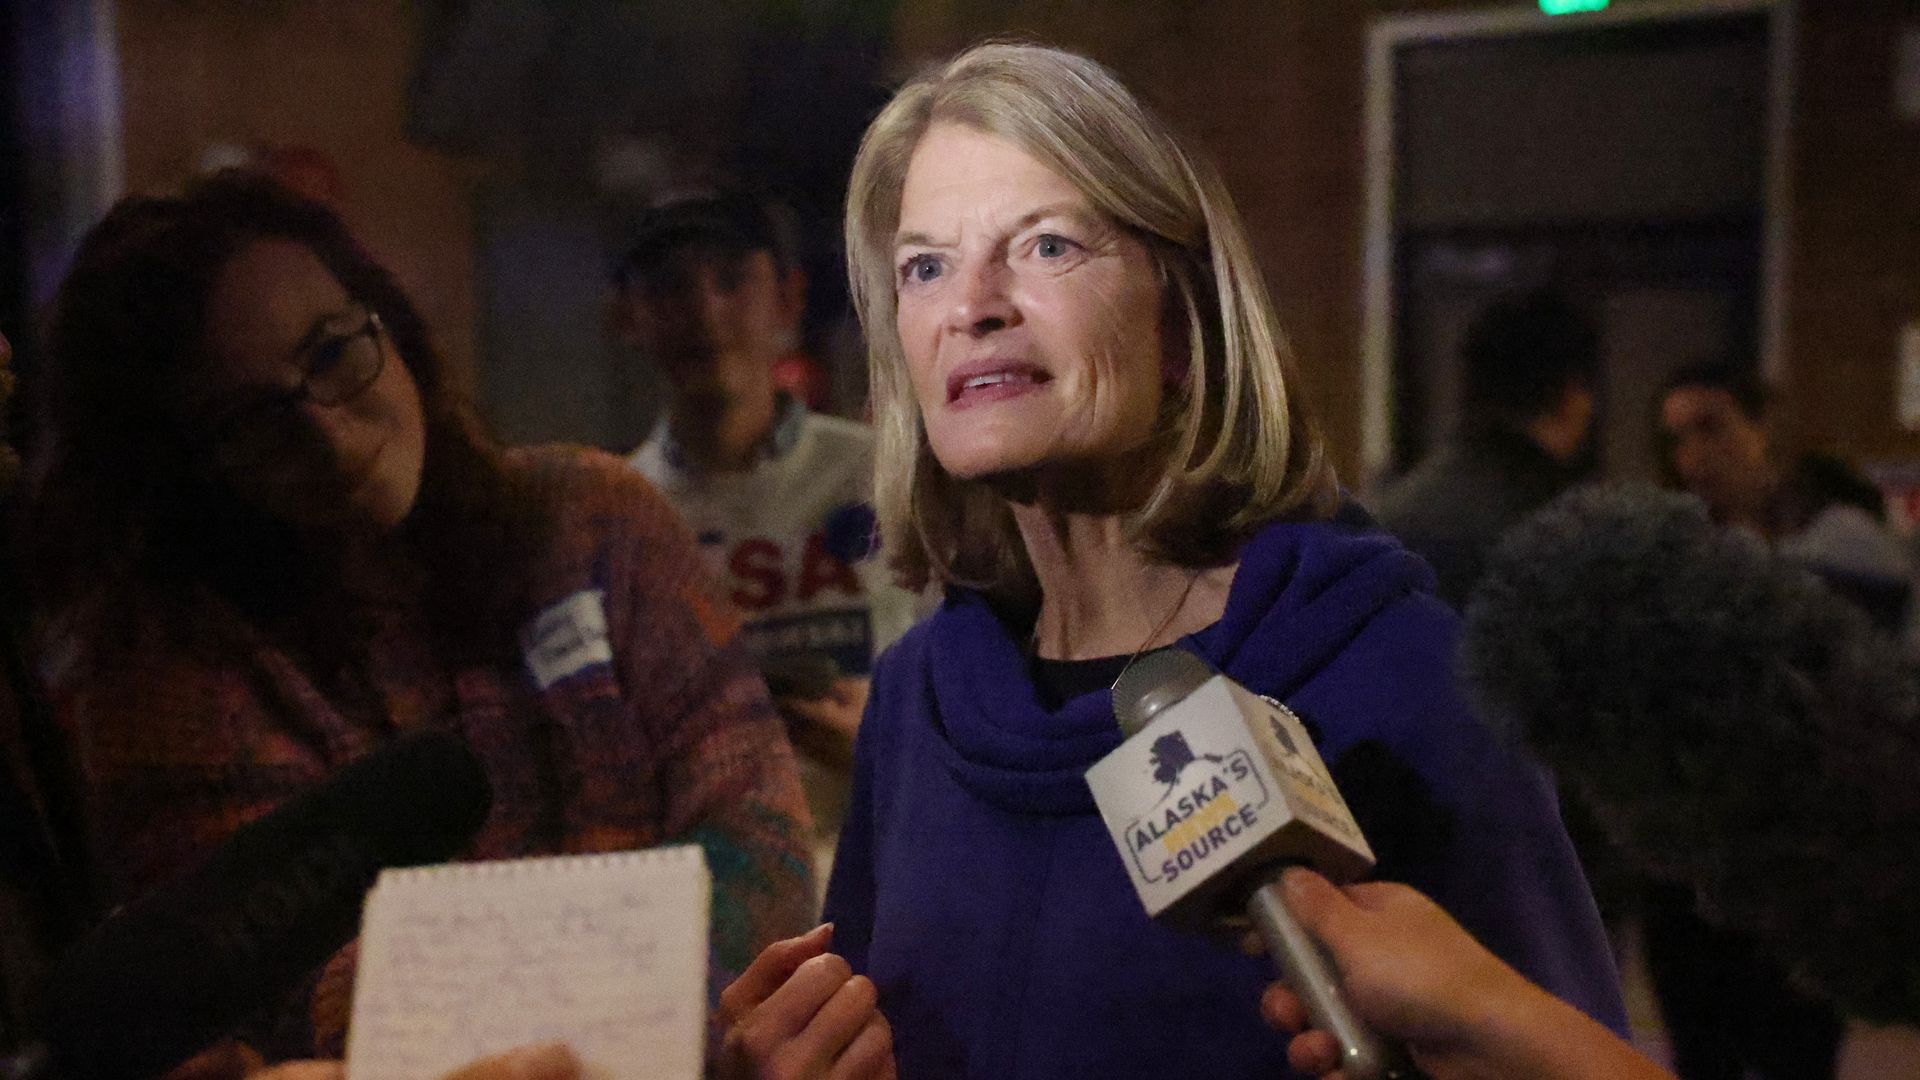 en. Lisa Murkowski (R-AK) speaks to supporters at an election night watch party on November 08, 2022 in Anchorage, Alaska. 